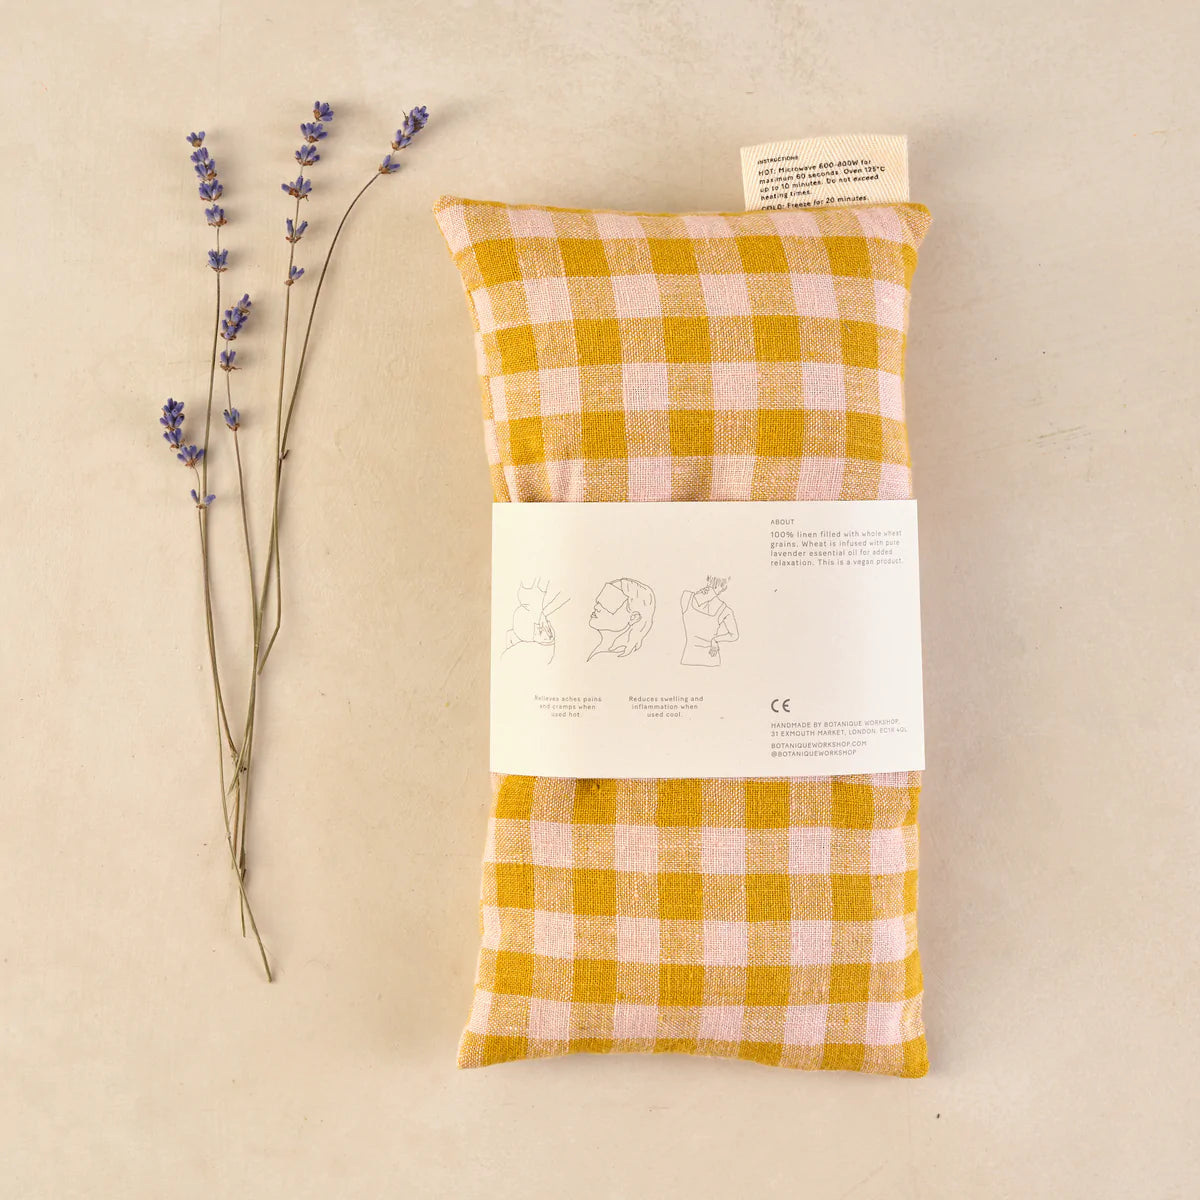 Multi-use lavender therapy Pillow - Wes gingham - The Bristol Artisan Handmade Sustainable Gifts and Homewares.